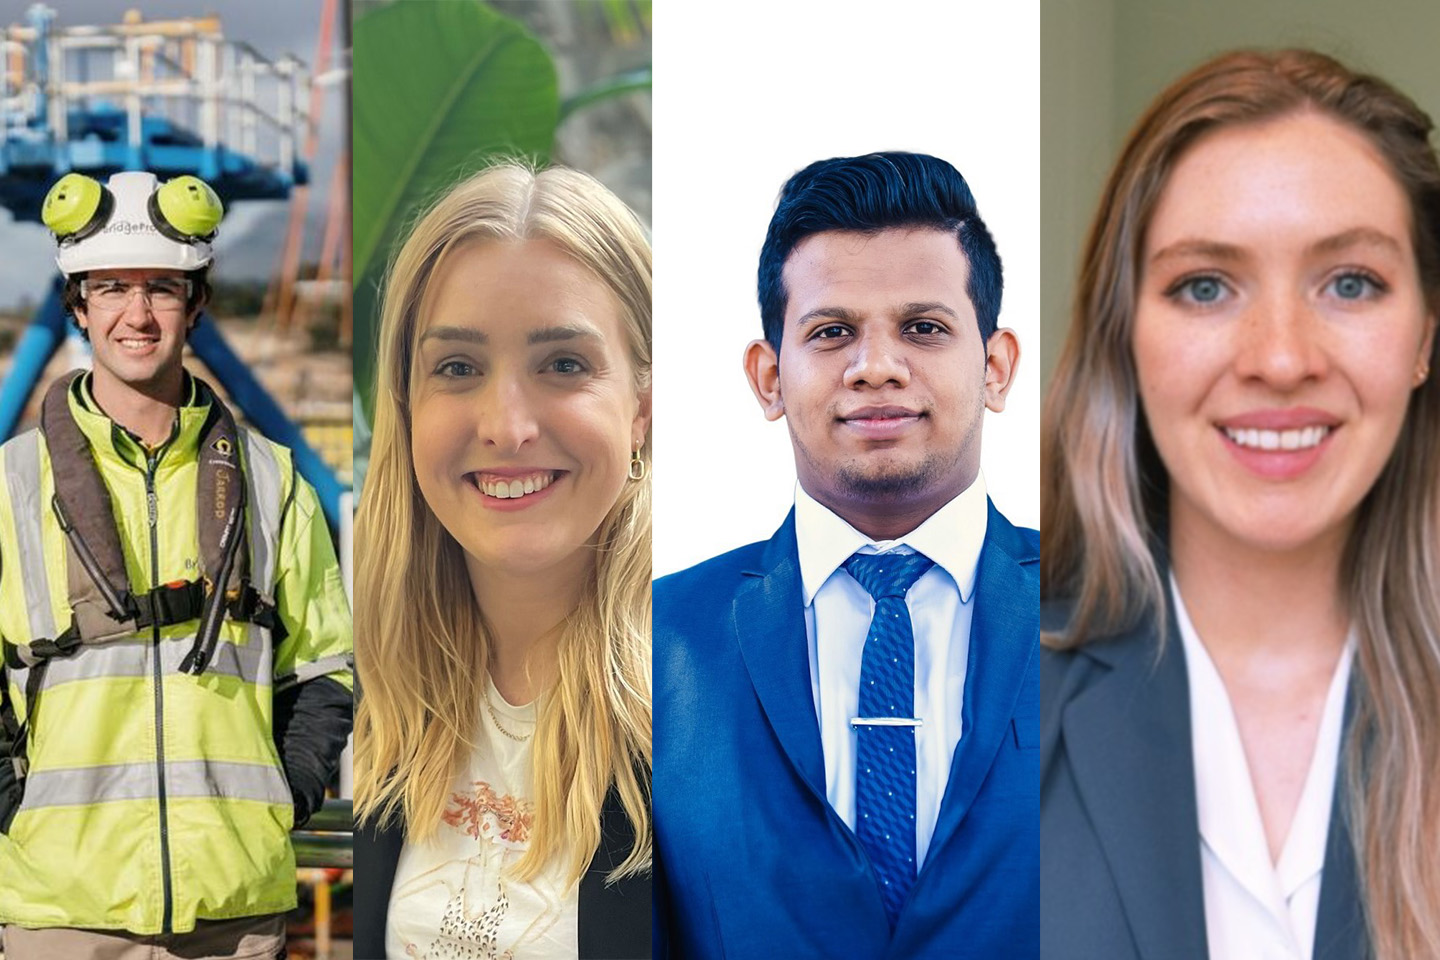 headshots of the four new Tasmania committee members, two men and two women